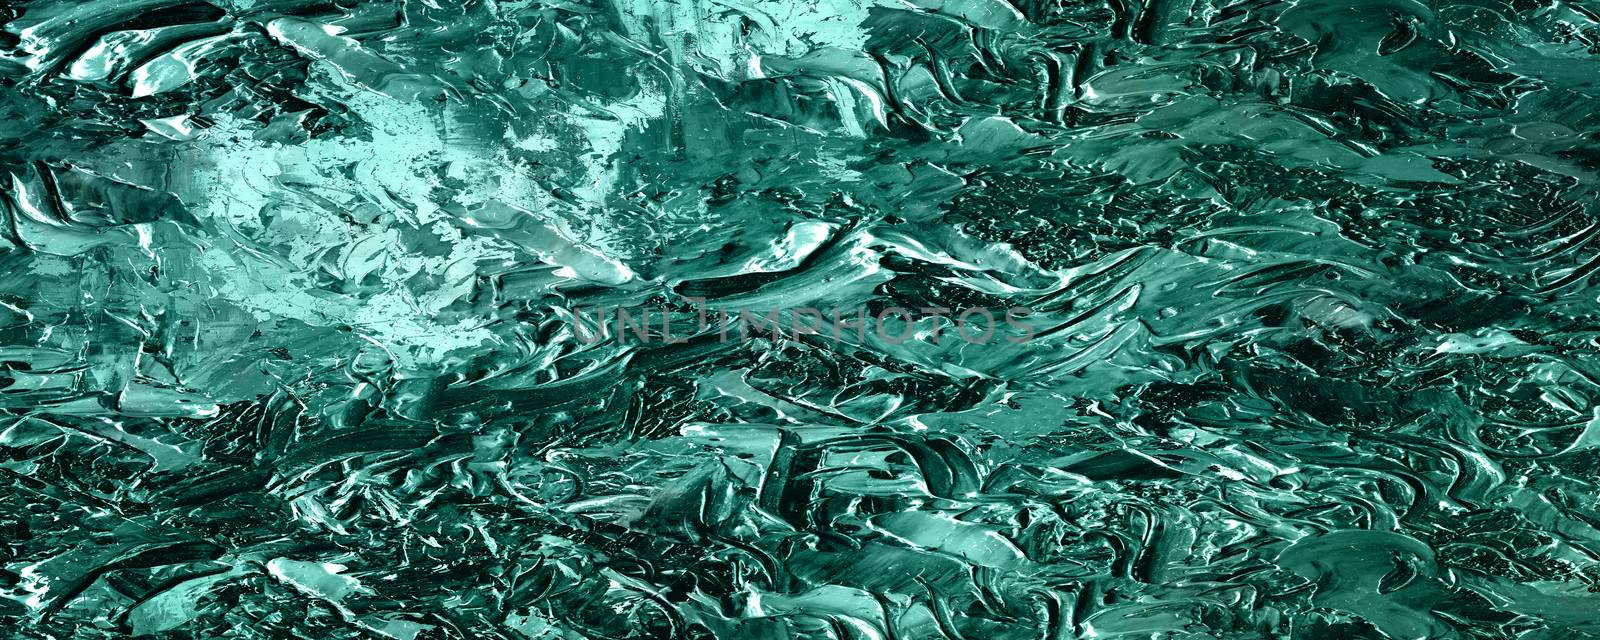 Background image with an abstract pattern in green tones by georgina198